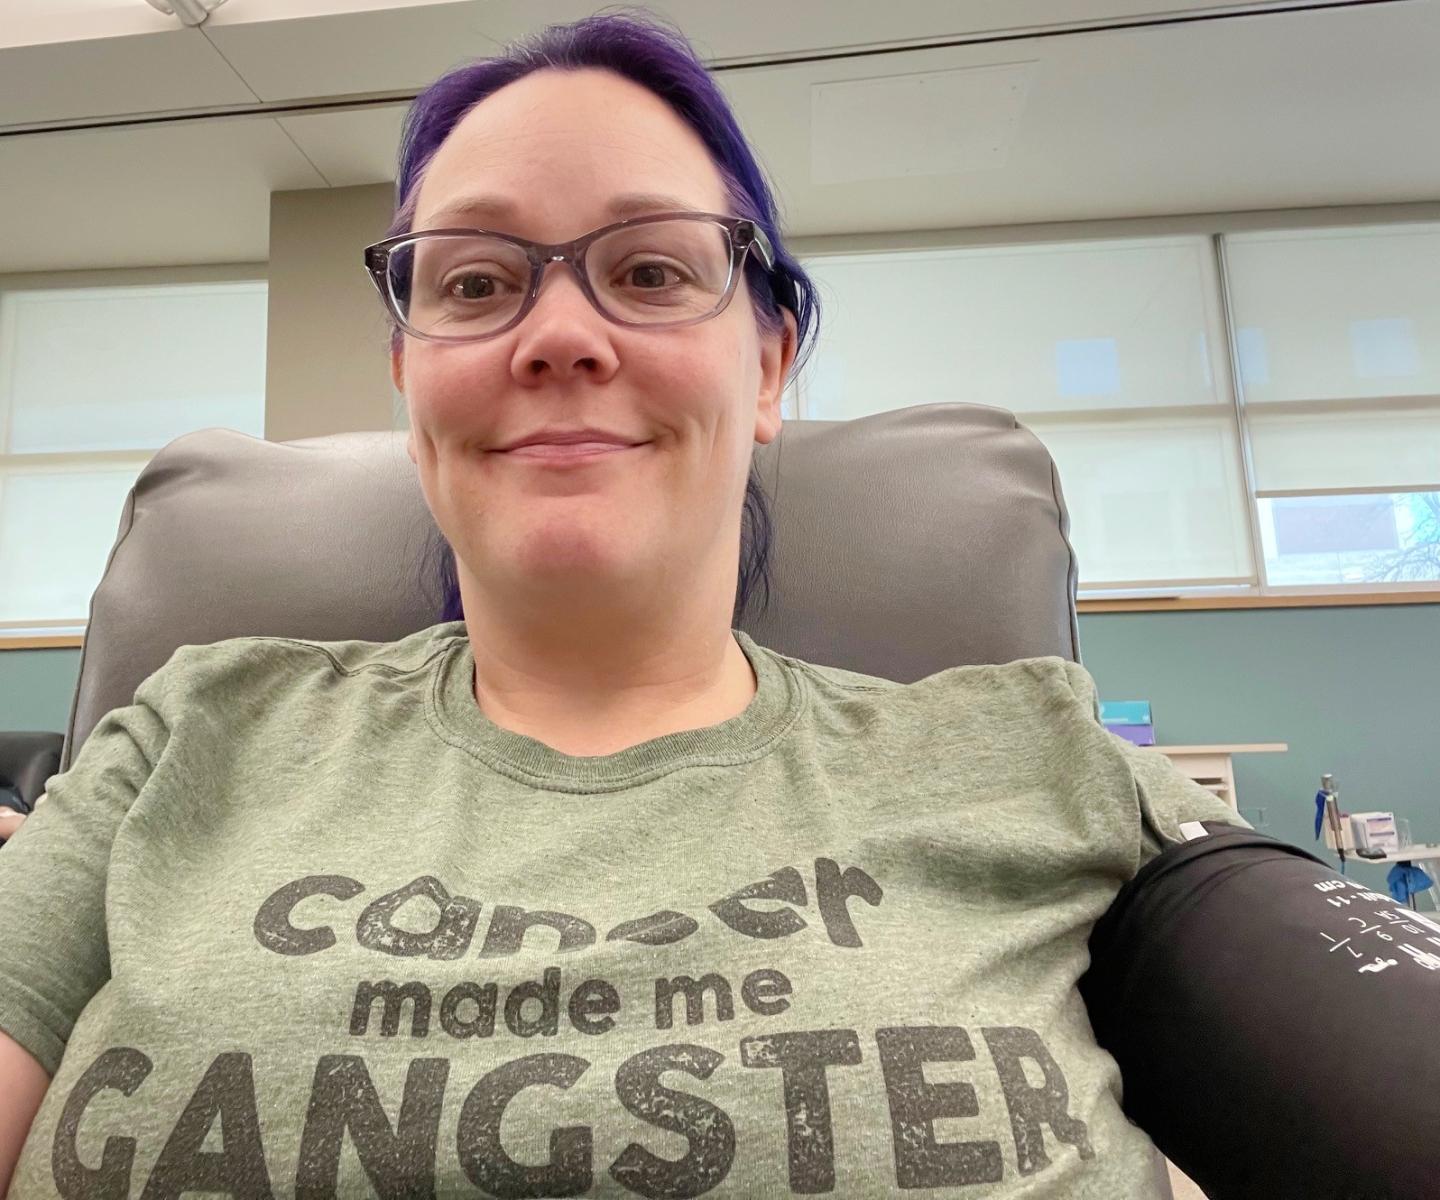 Blood donor with T-shirt that says "Cancer made me gangster"